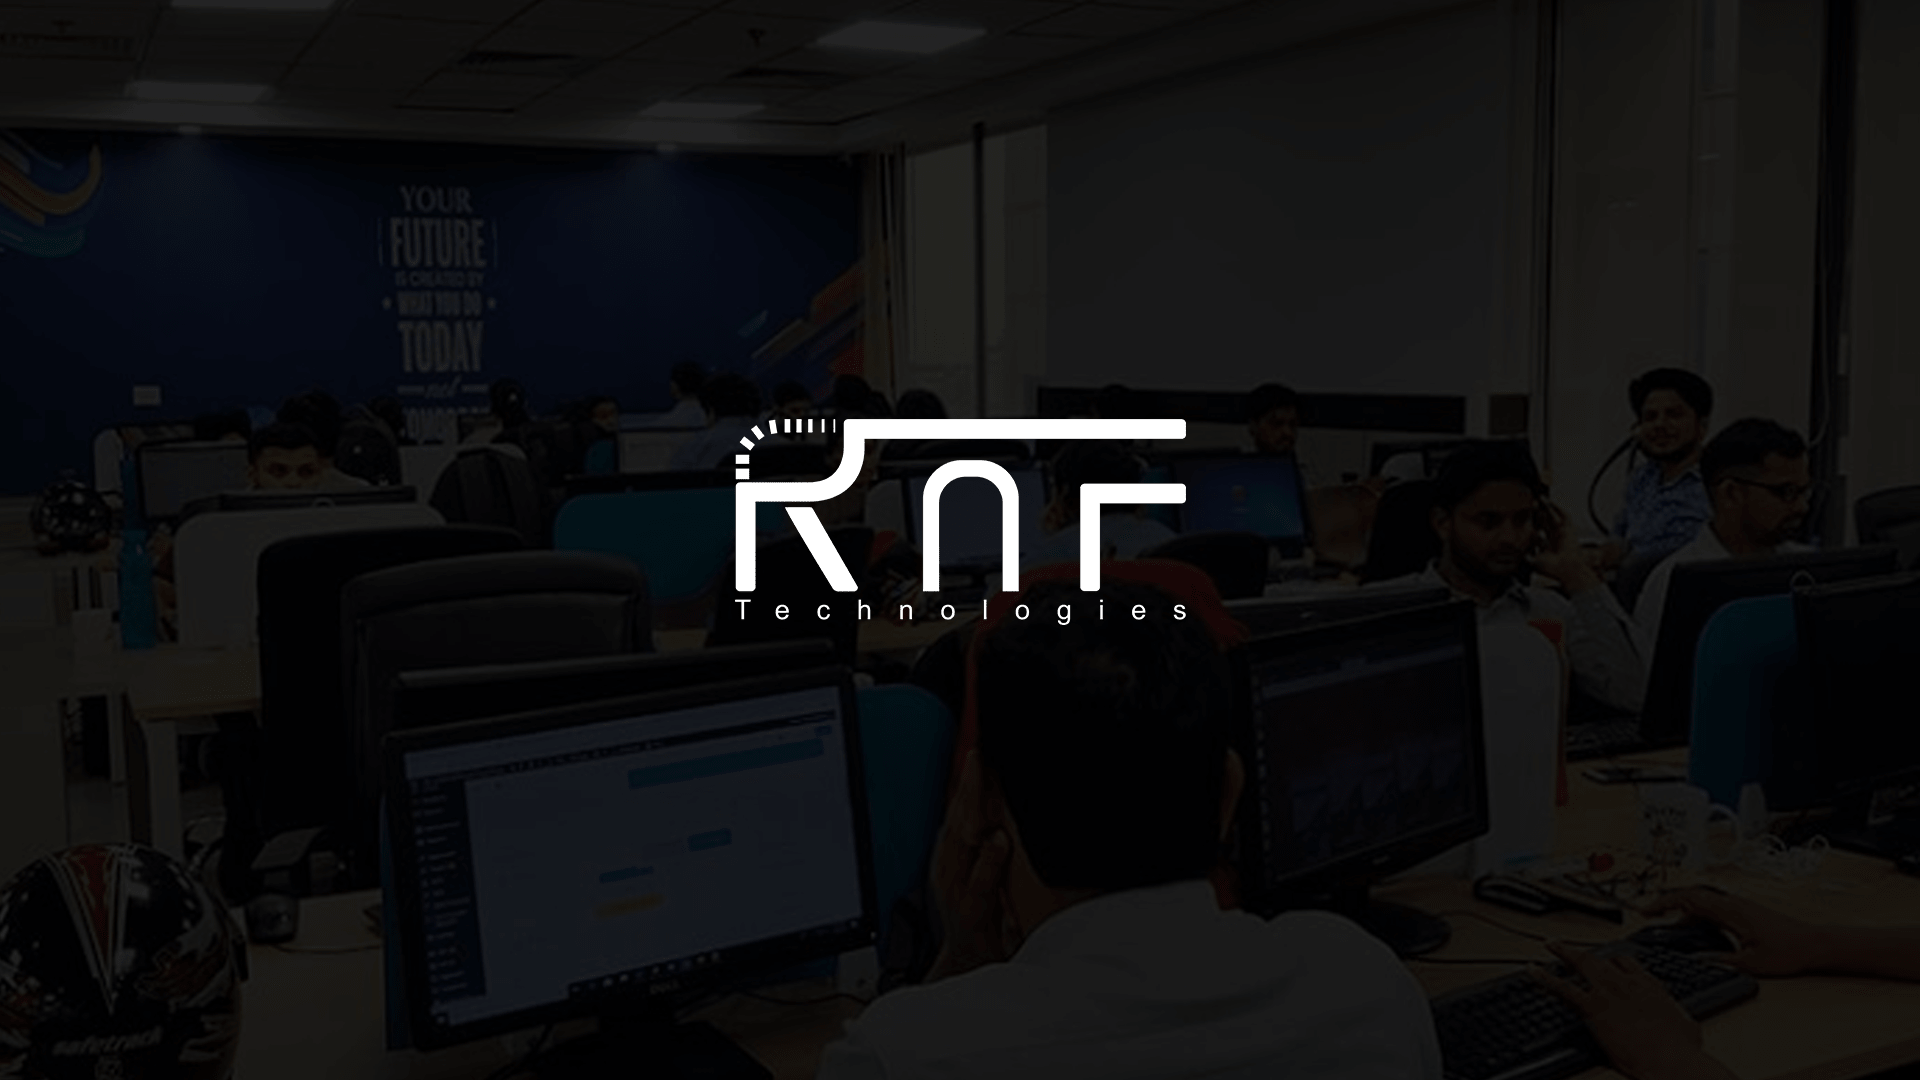 5 reasons you should work with rnf technologies | rnf technologies